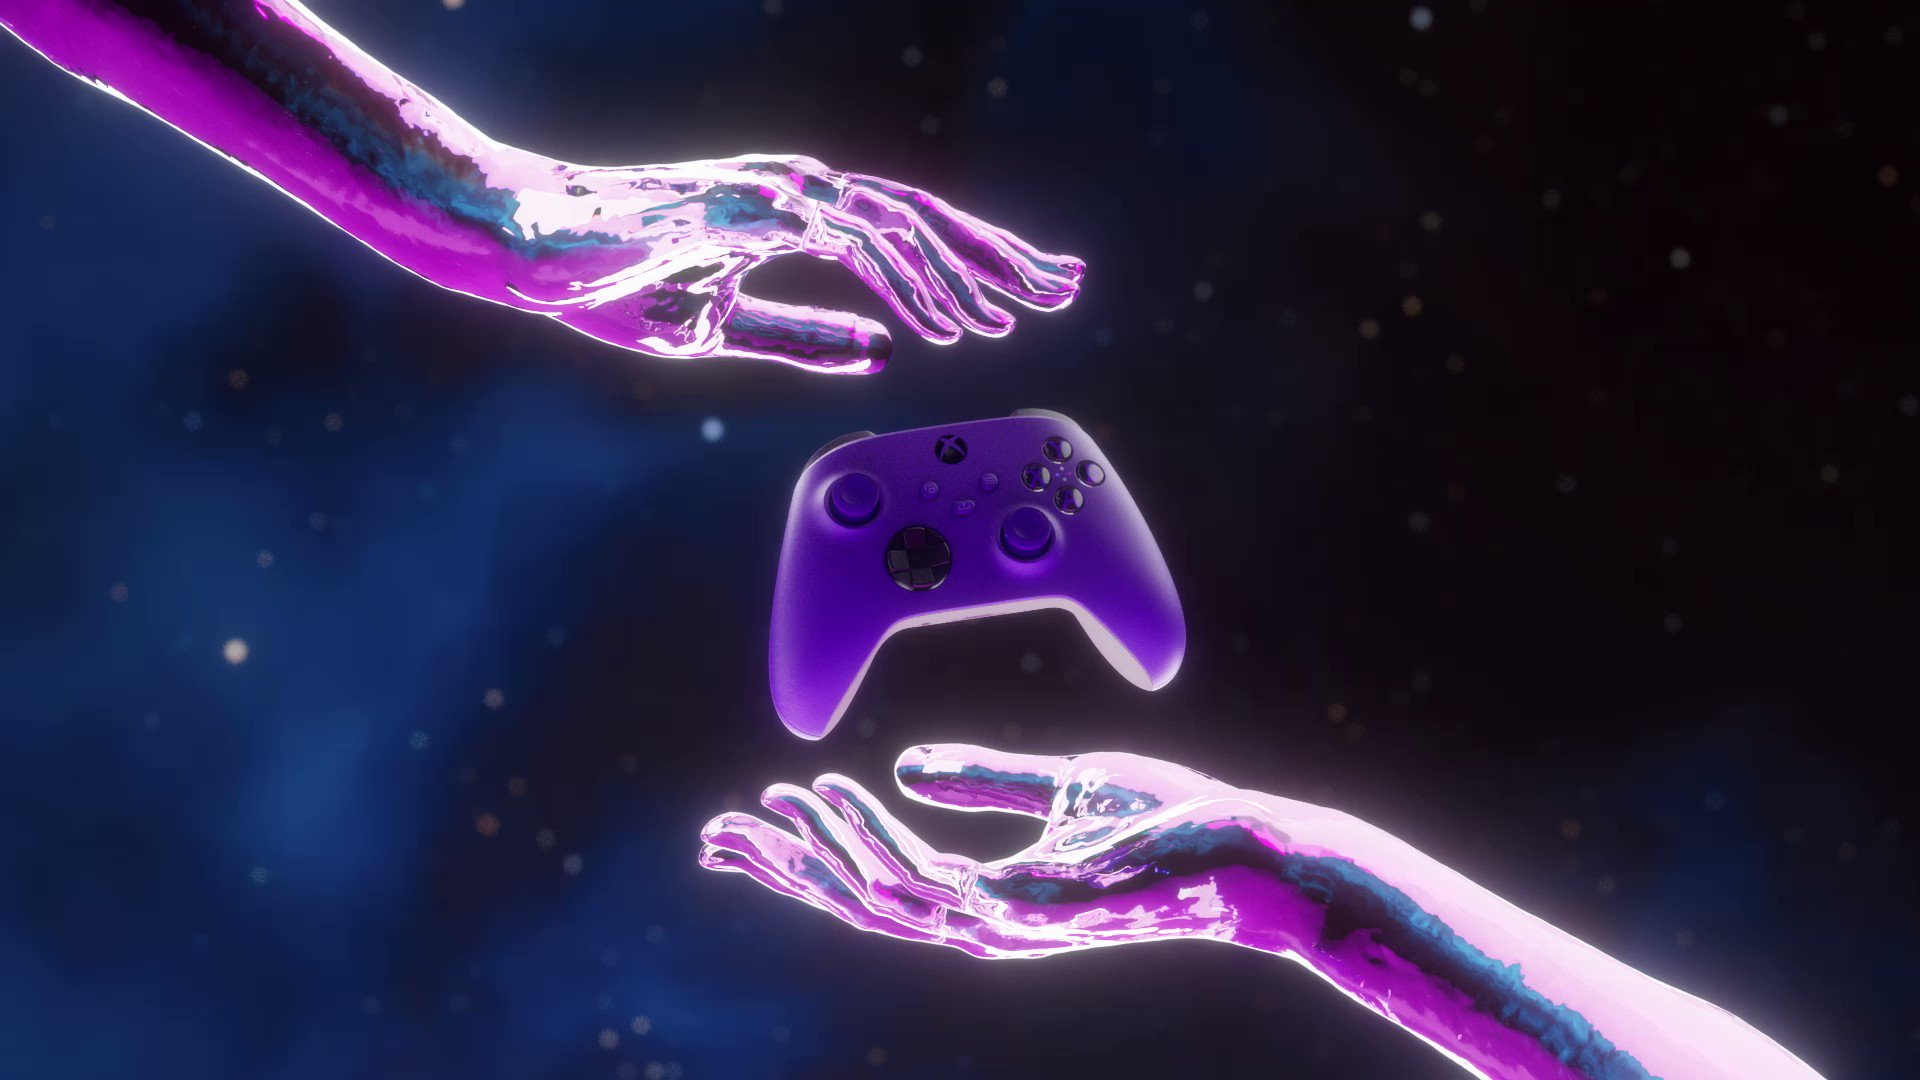 The Astral Purple Xbox controller is now available to preorder